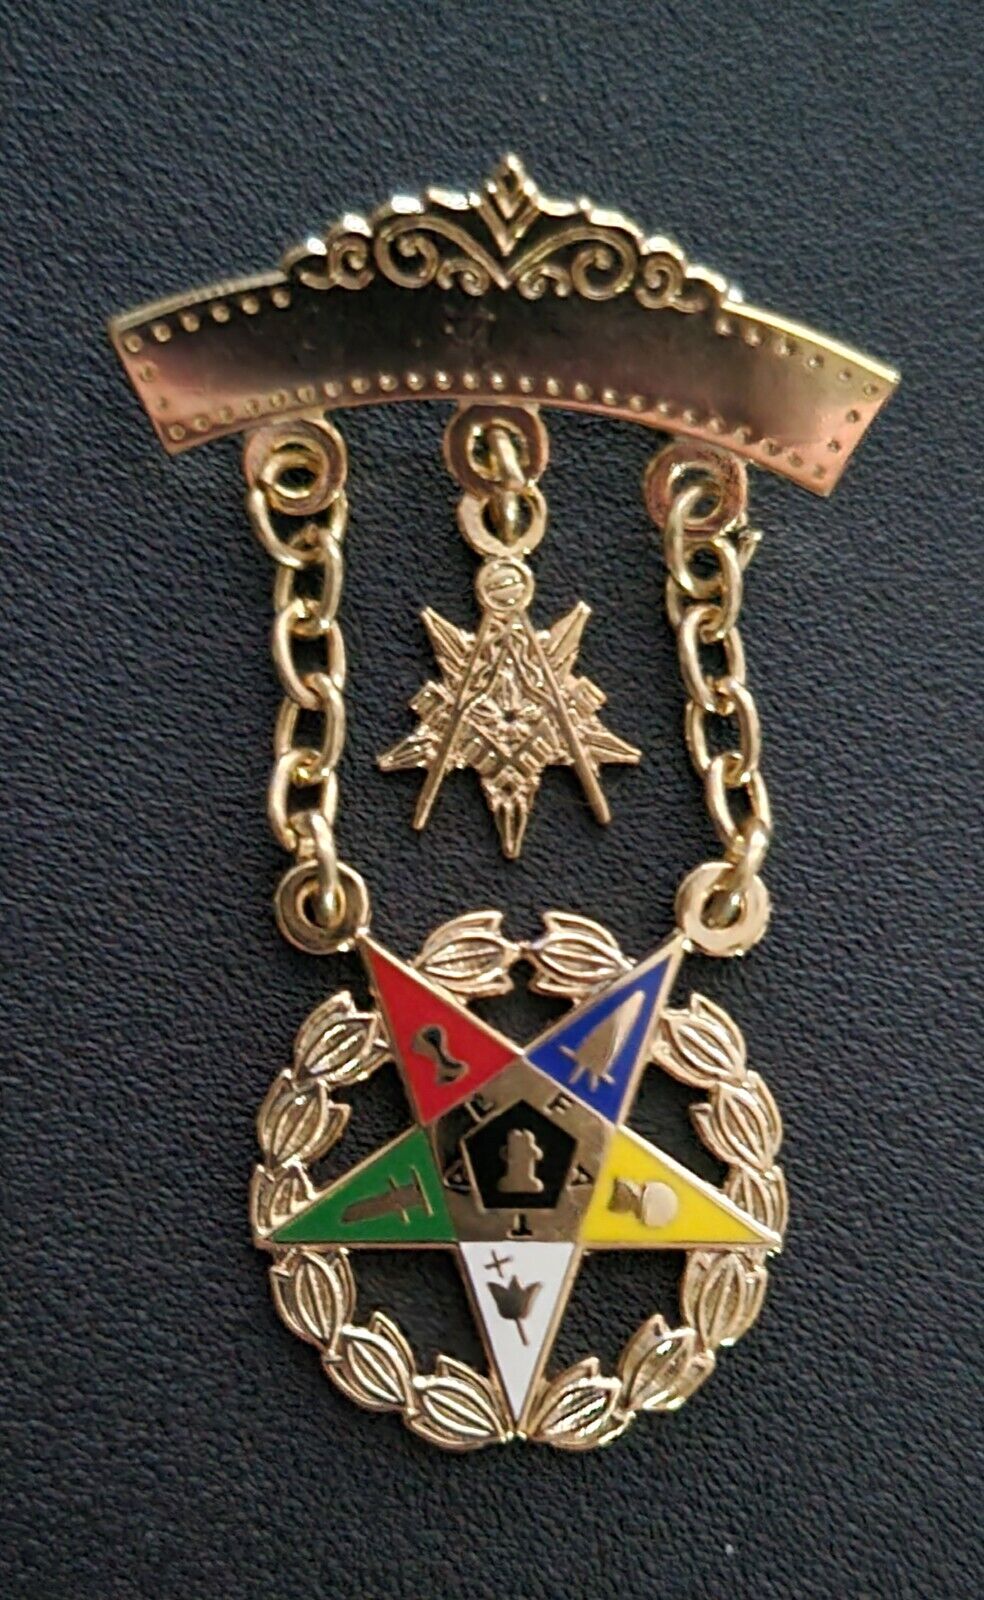 Patron / Past Patron Jewel ORDER OF EASTERN STAR  OES (2)